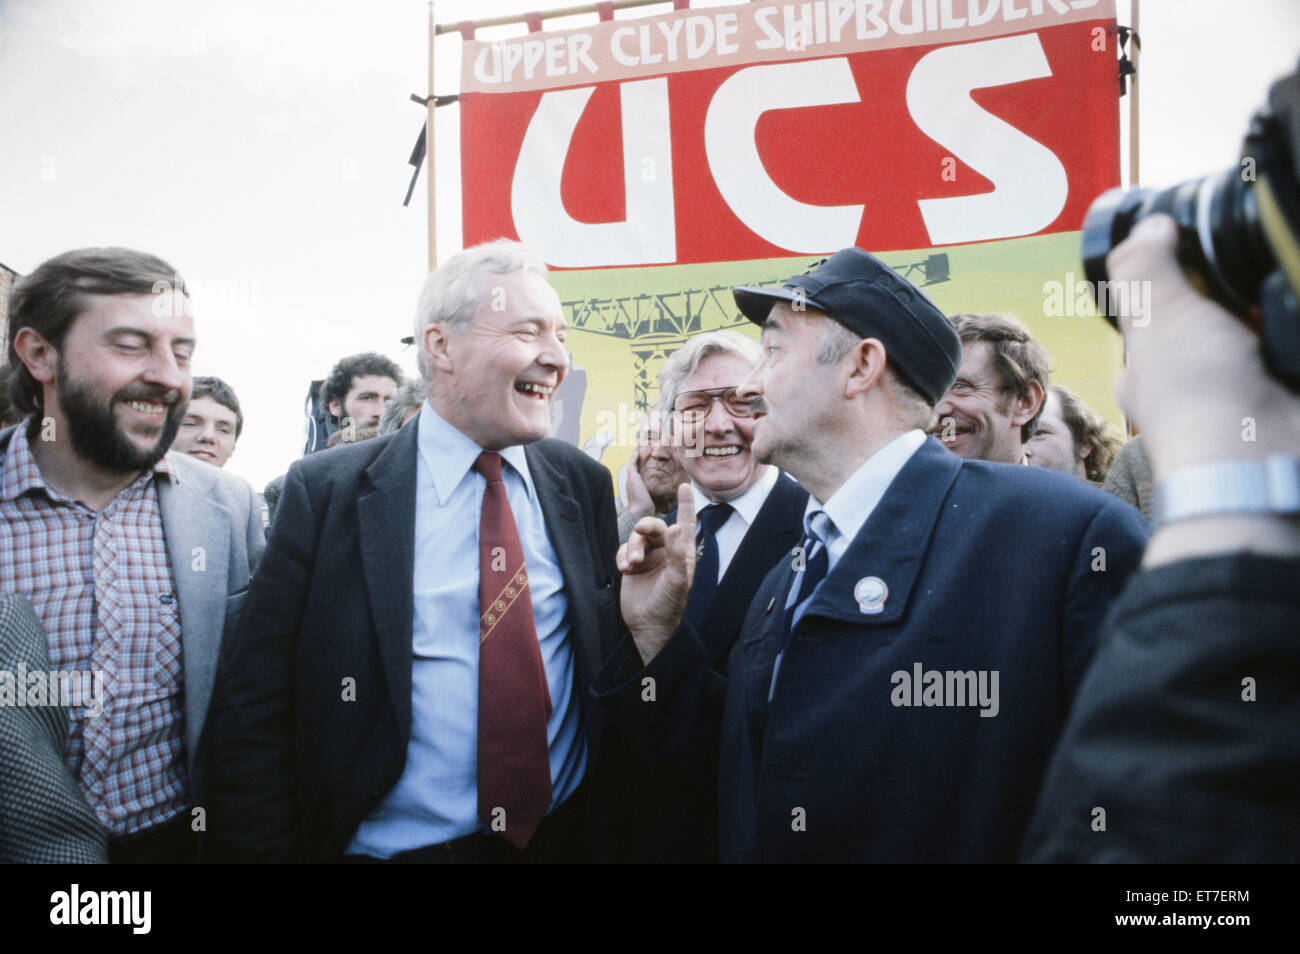 MP for Bristol South East Tony Benn attends an anti Margaret Thatcher demonstration with Clyde shipbuilders. September 1982. Stock Photo